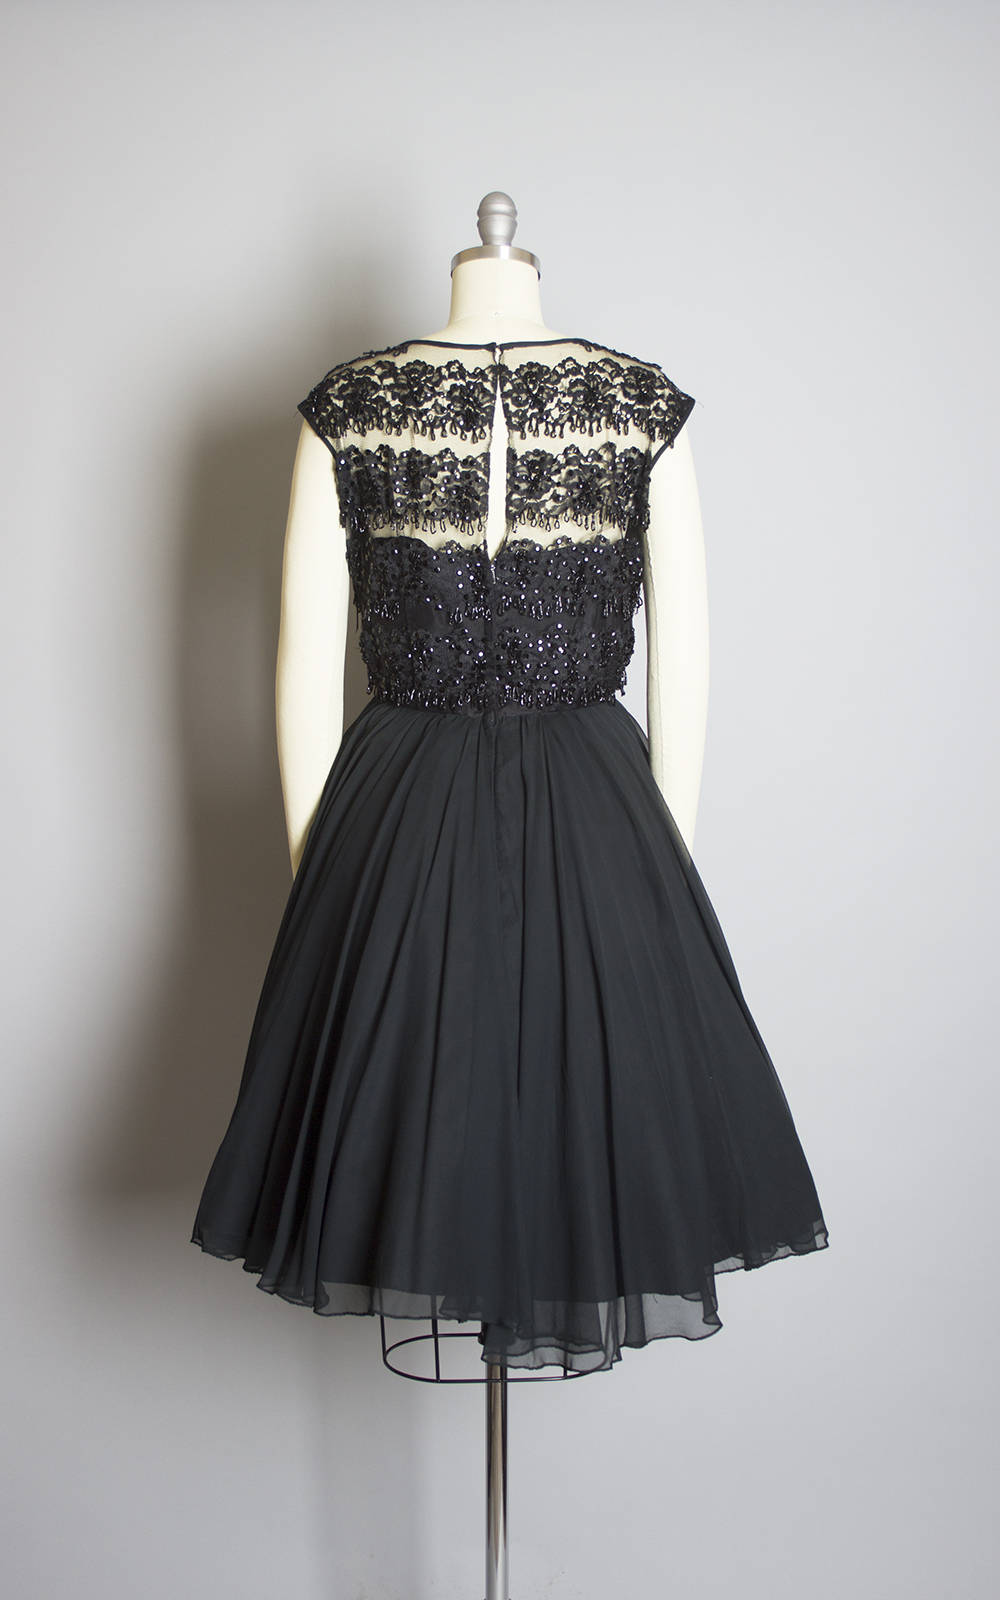 Vintage 1950s Dress | 50s Beaded Sequin Black Chiffon Sheer Lace Full Skirt Party Dress (small)